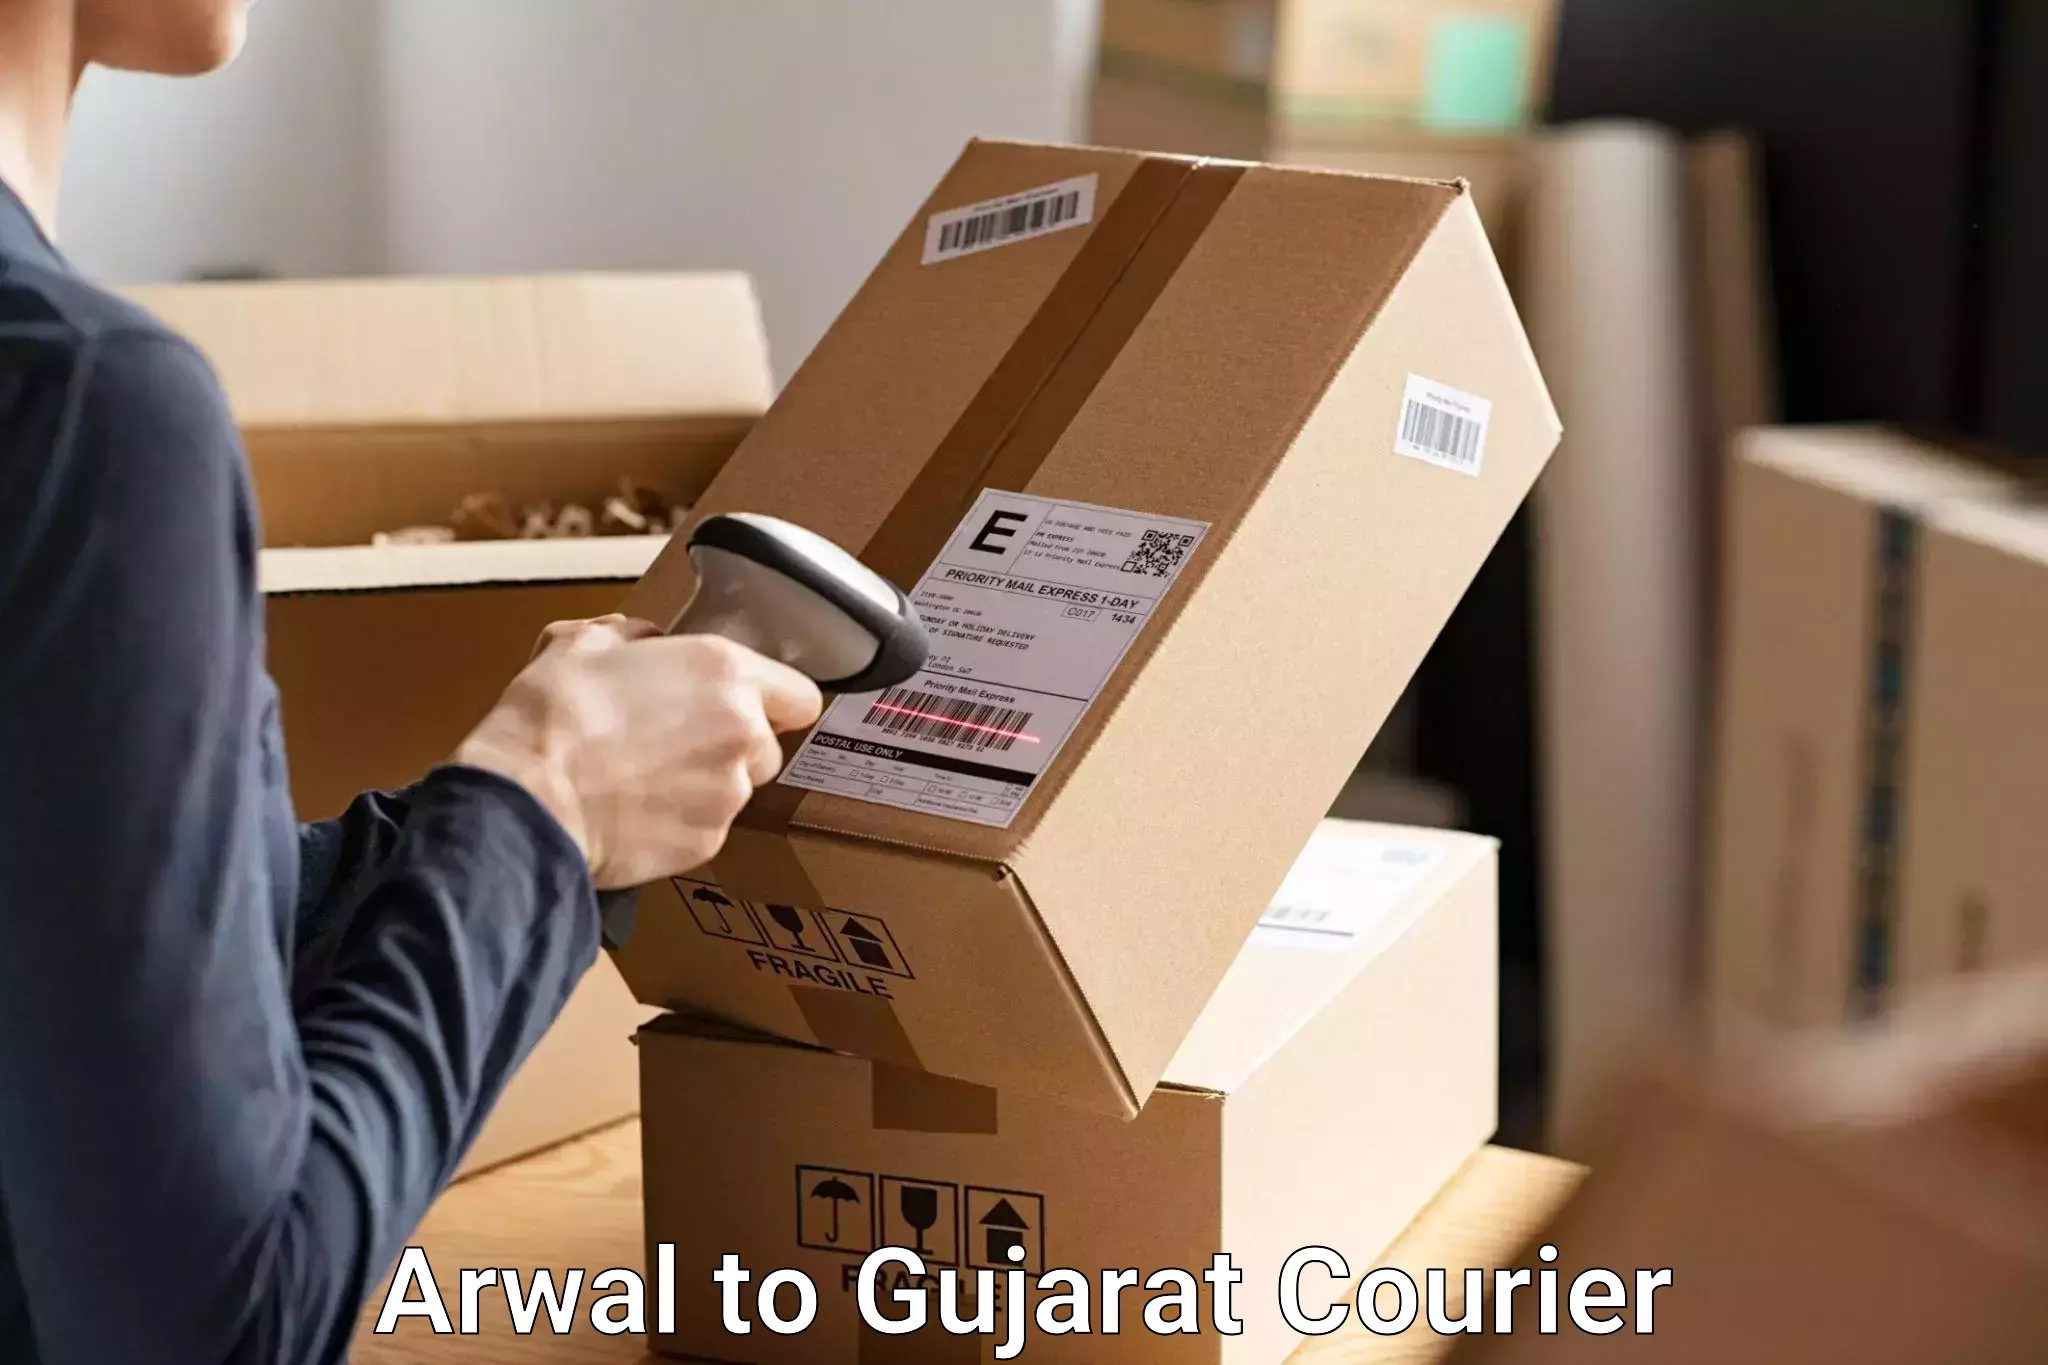 Luggage shipment specialists Arwal to Gujarat